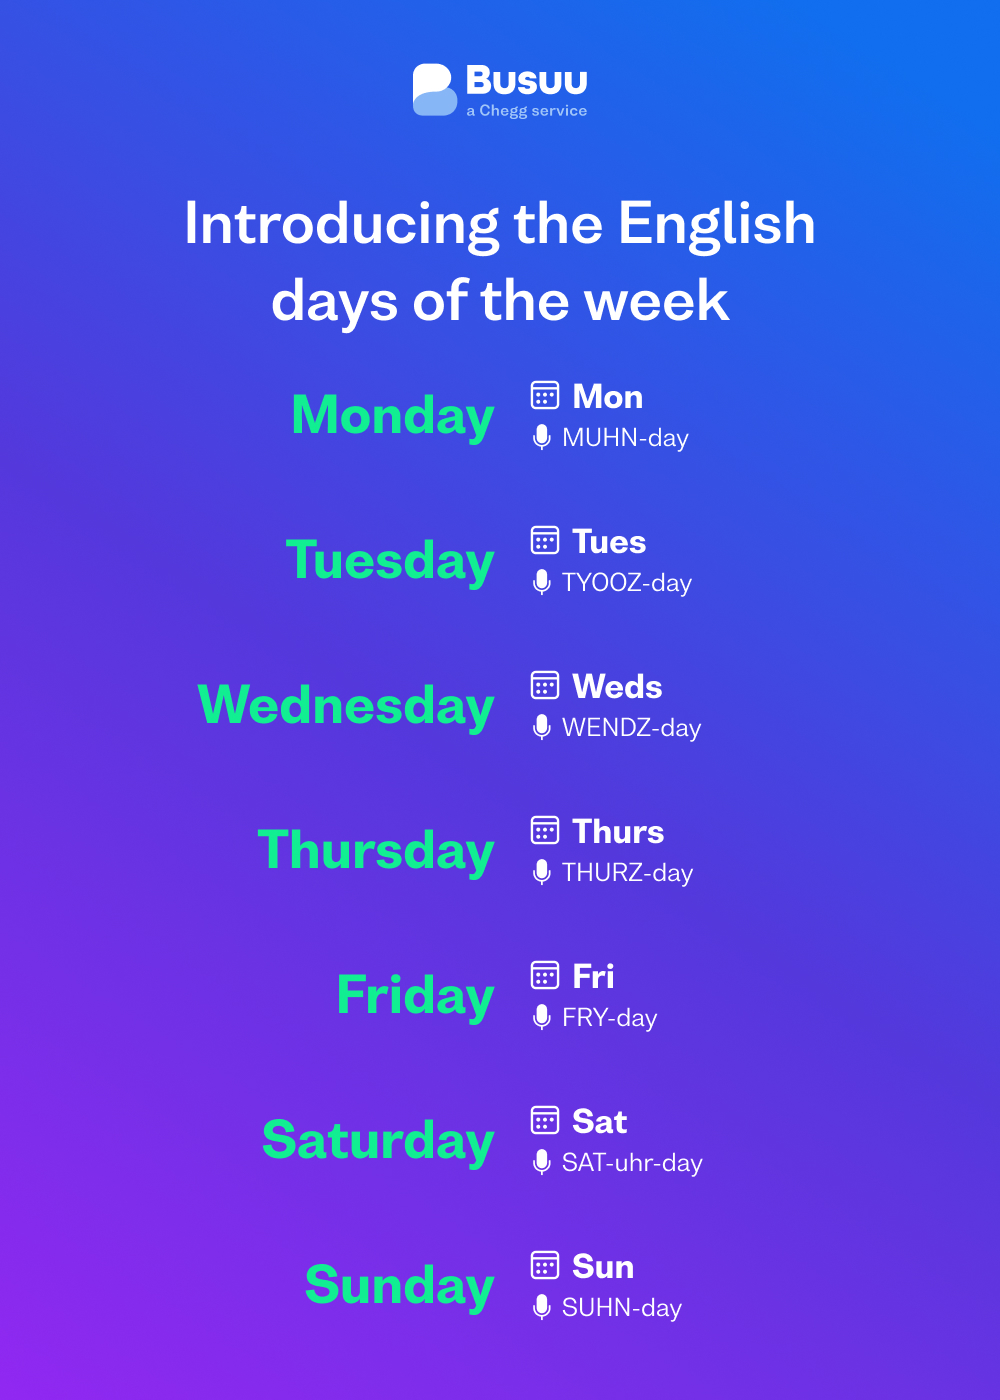 english-days-of-the-week-spellings-and-meanings-busuu